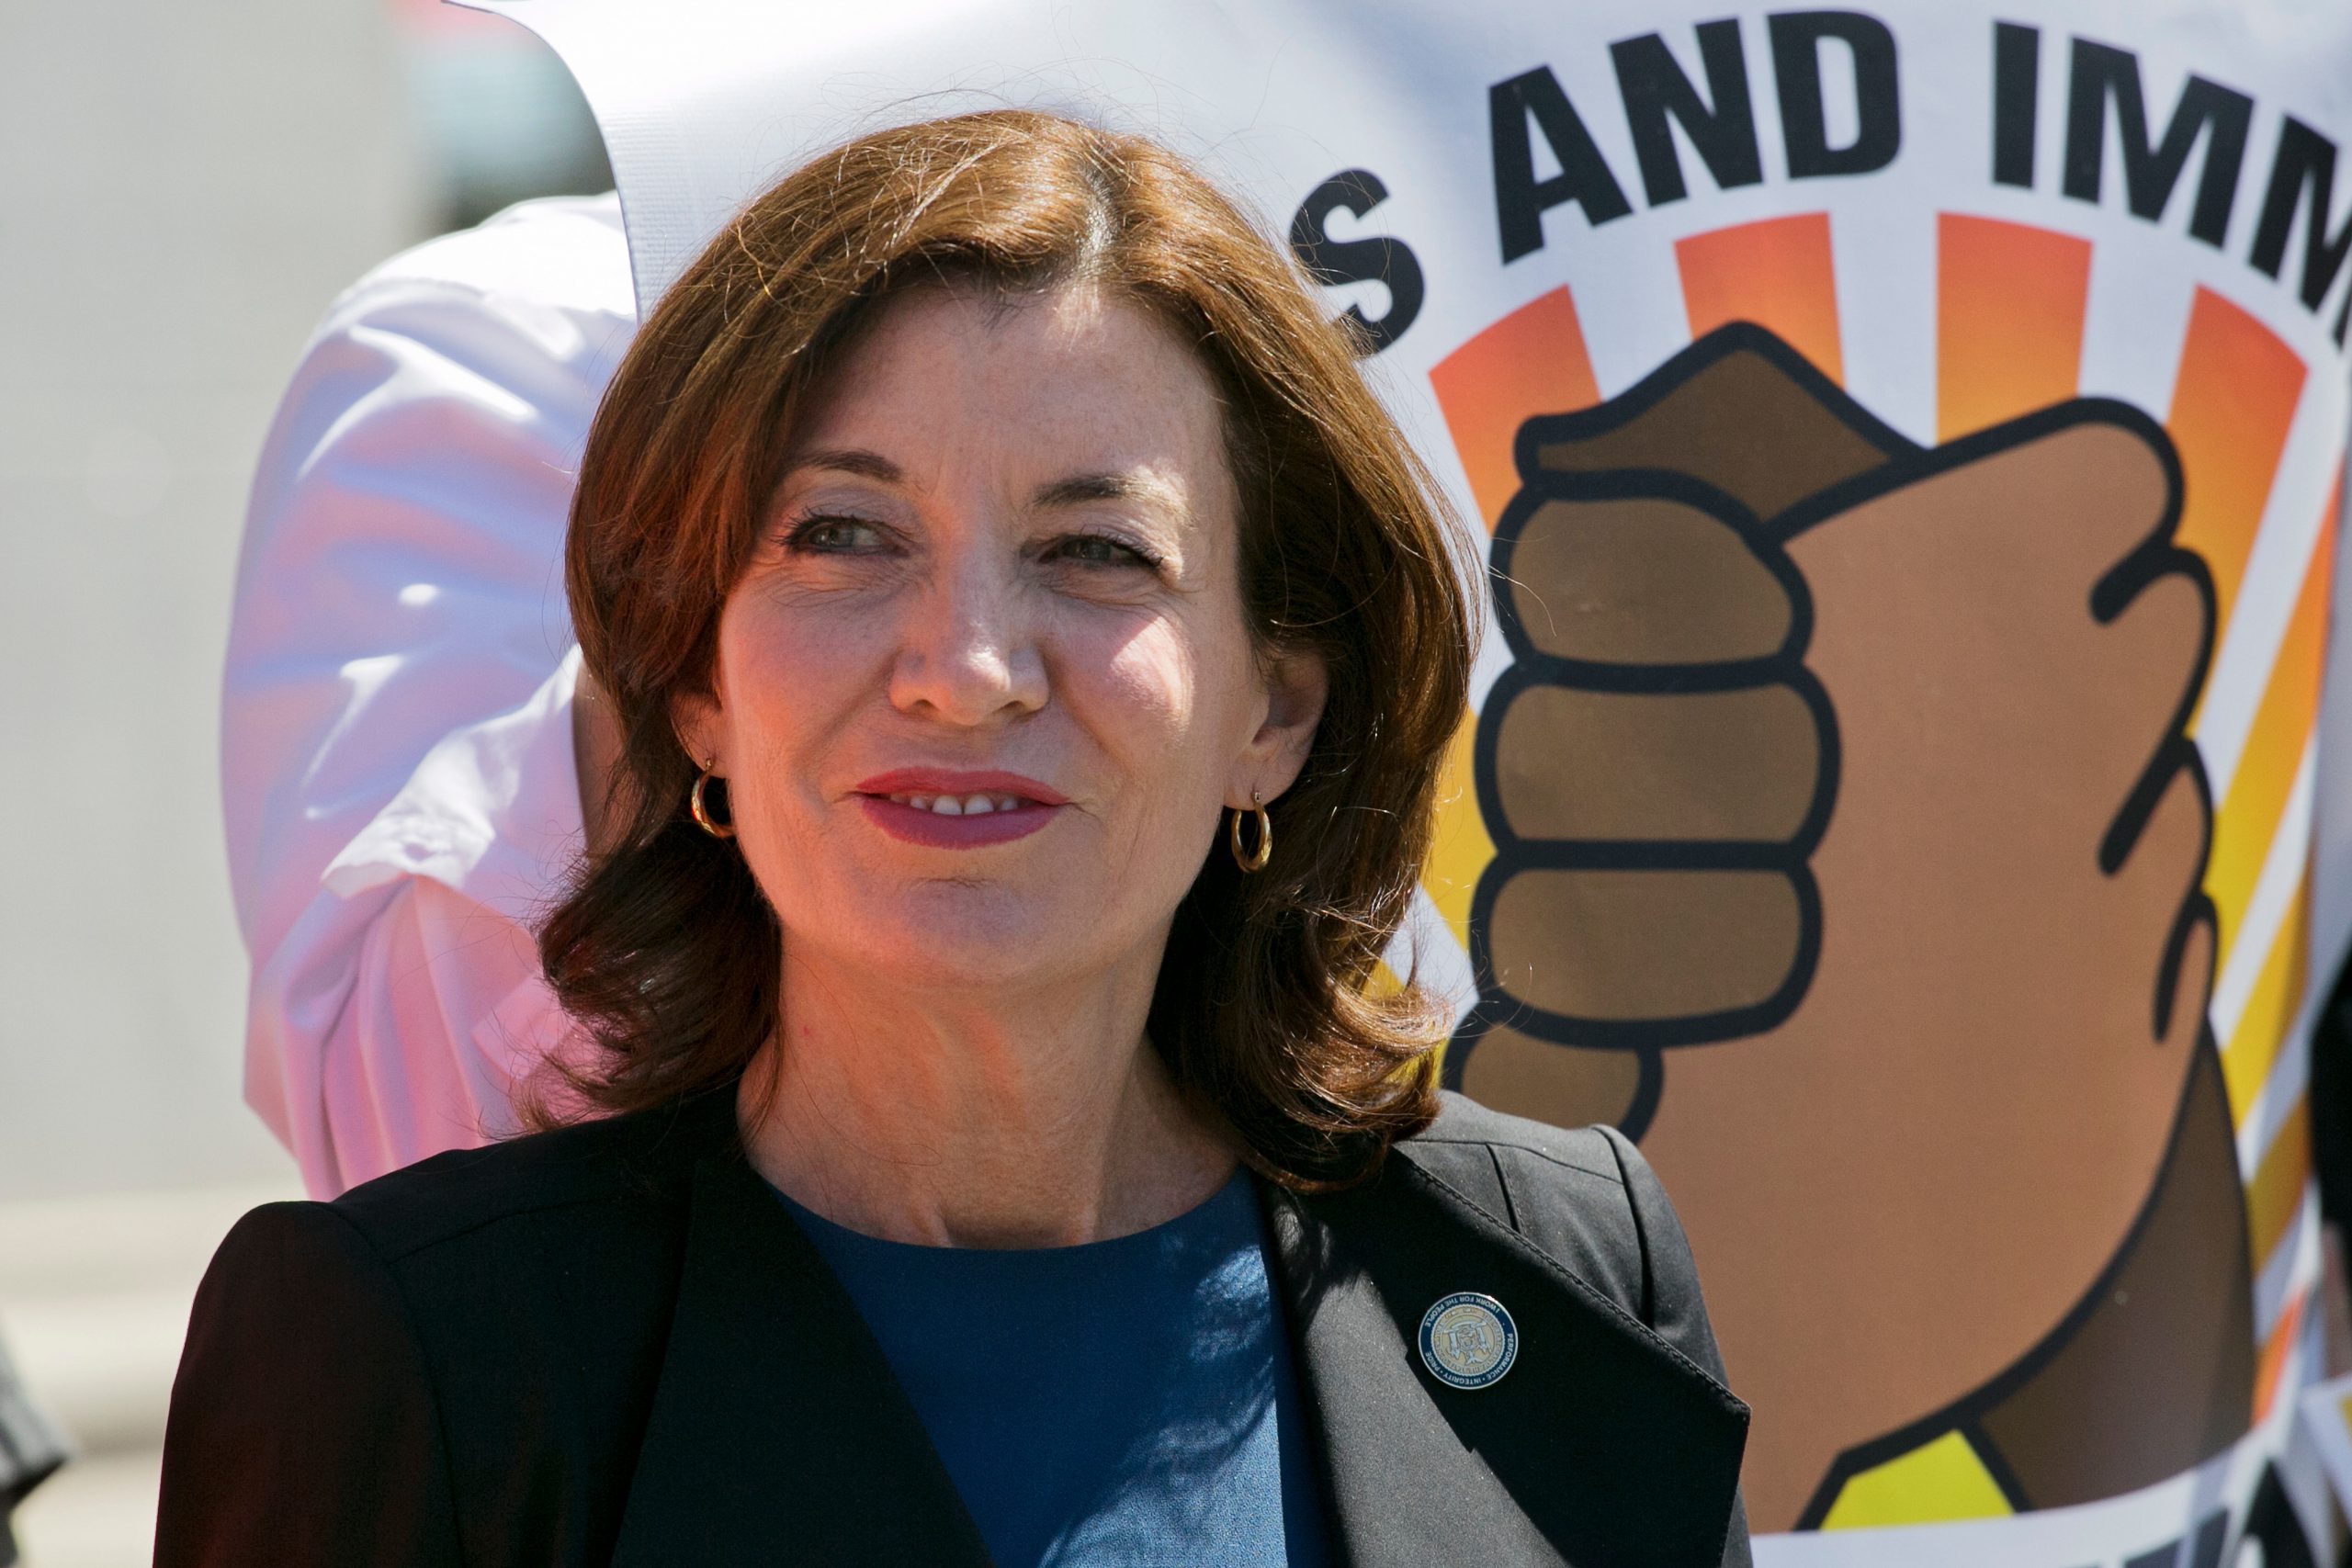 Kathy Hochul to take center stage as scandal ends Andrew Cuomo’s reign